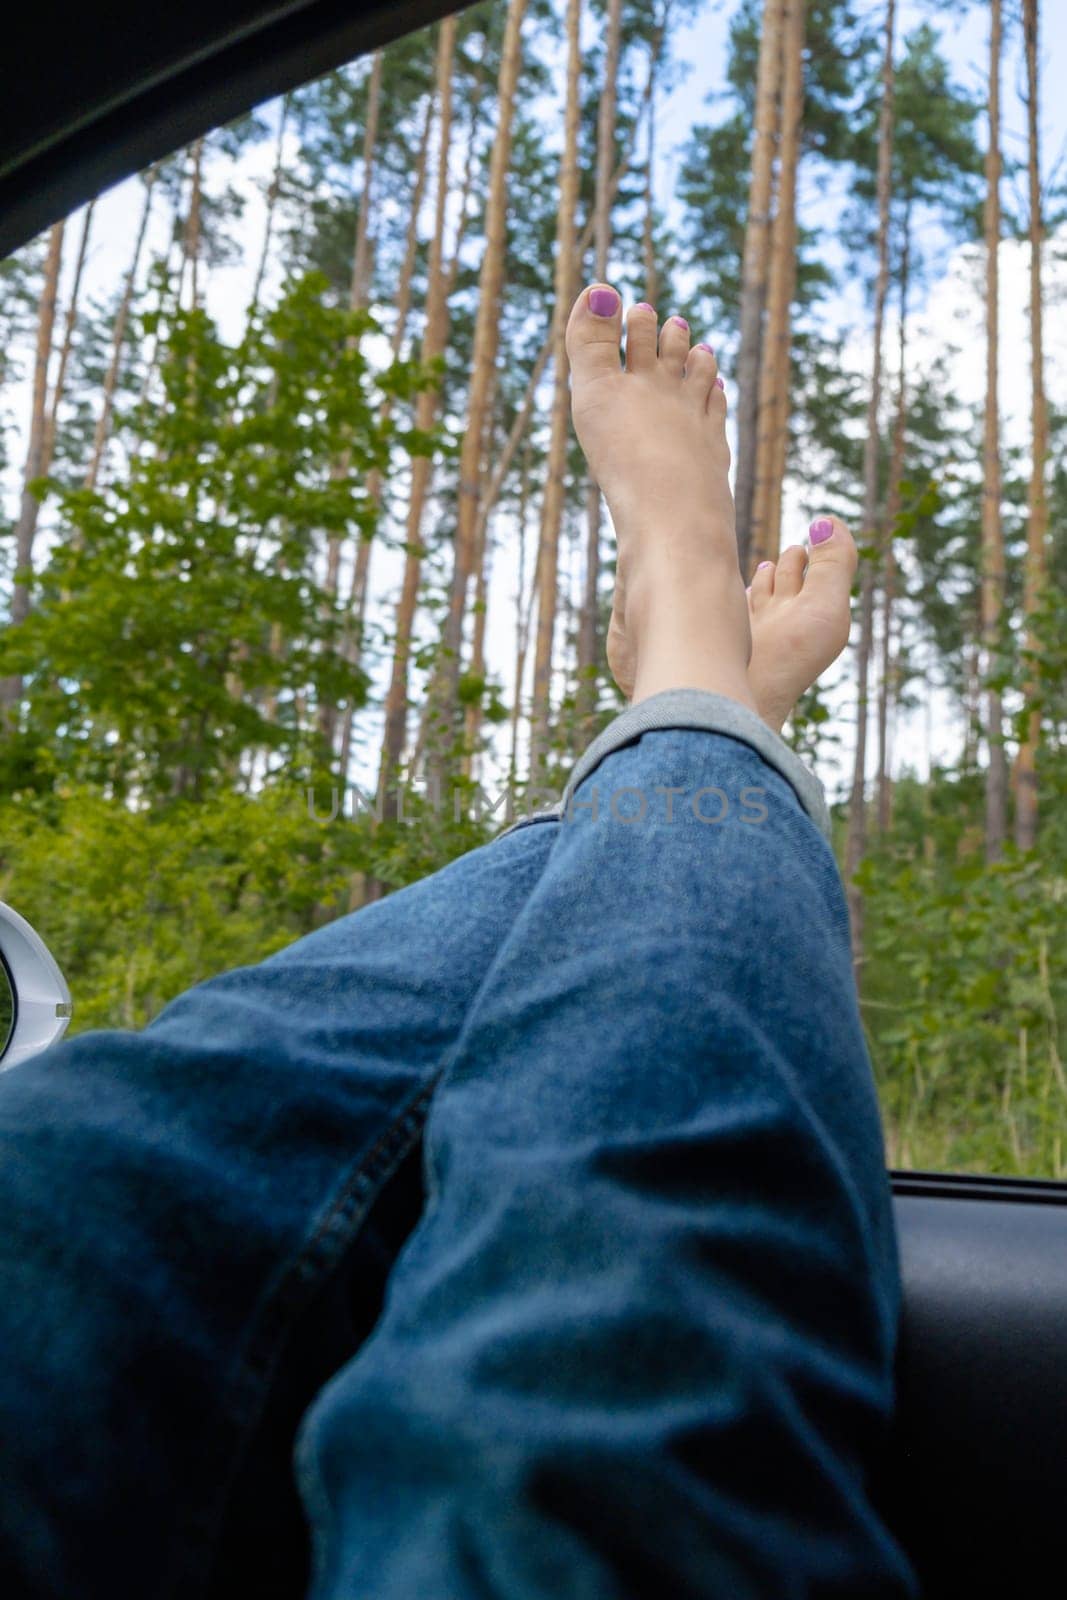 Female feet in blue jeans out of car window. Concept of comfortable travel vacation holiday. Getting away to make real candid moments. Reduce carbon footprint. Woman resting in road trip refresh and recharge